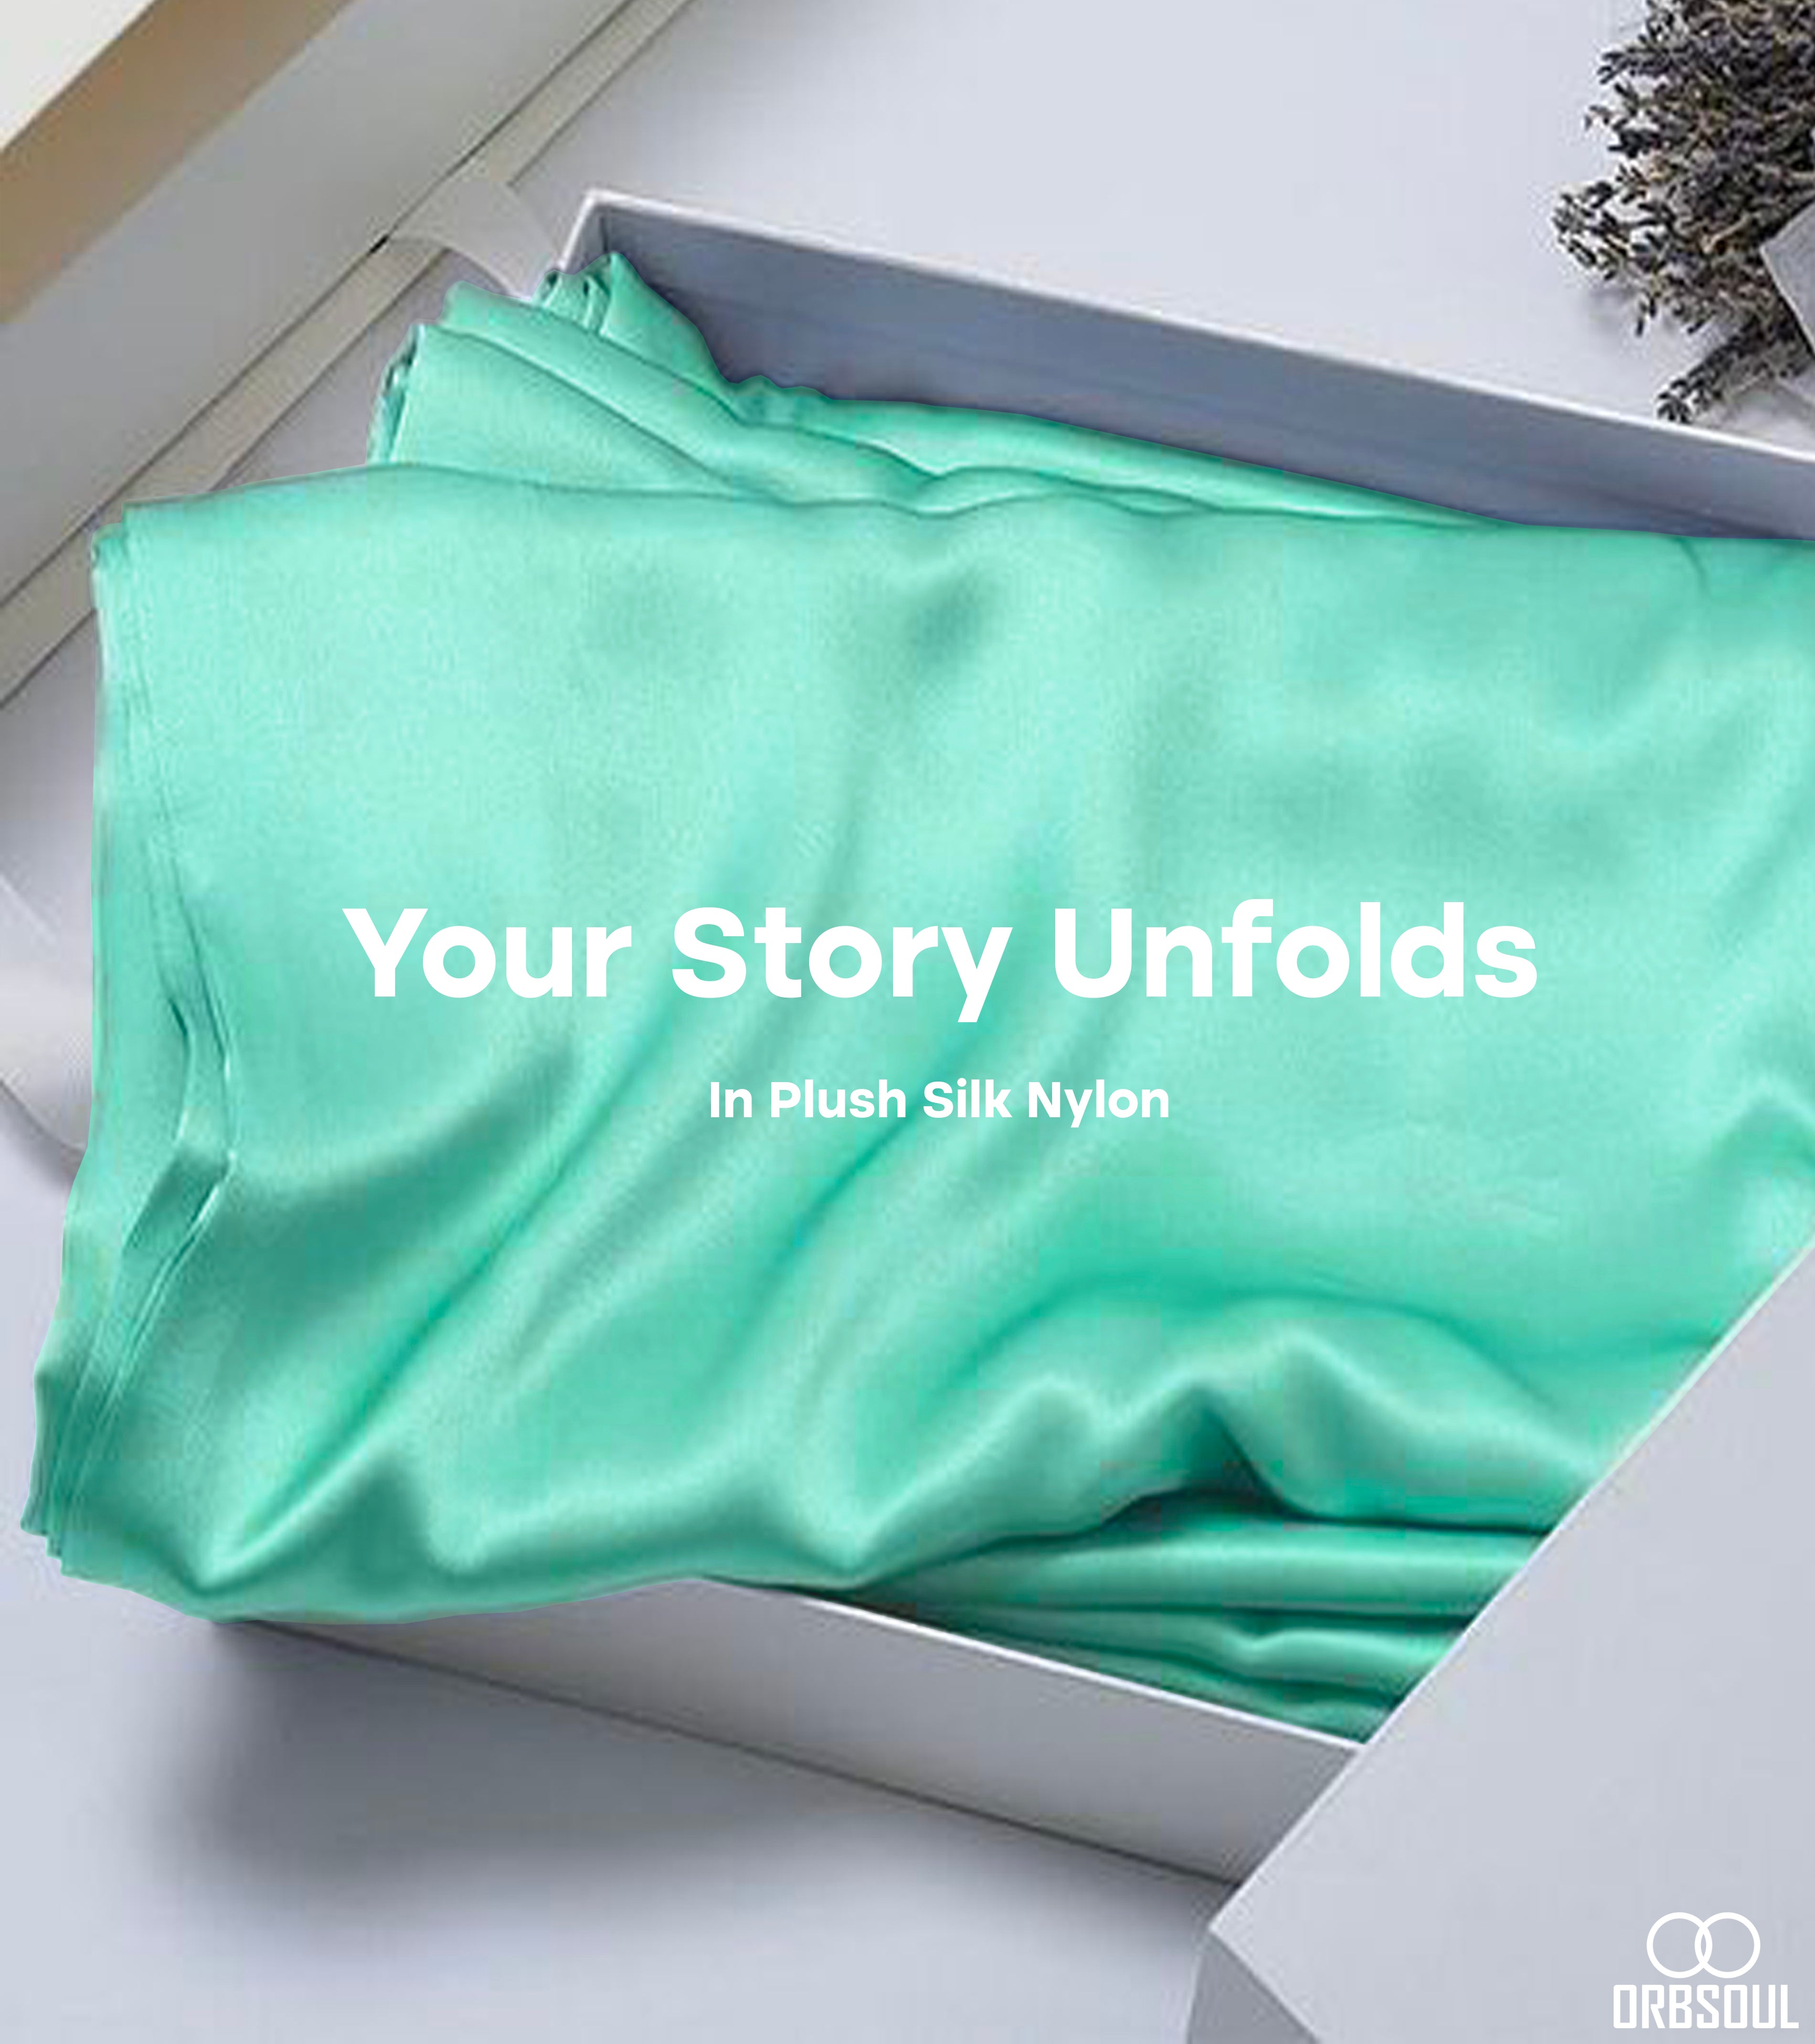 aerial silks fabric in a box being unpacked with text that says your story unfolds